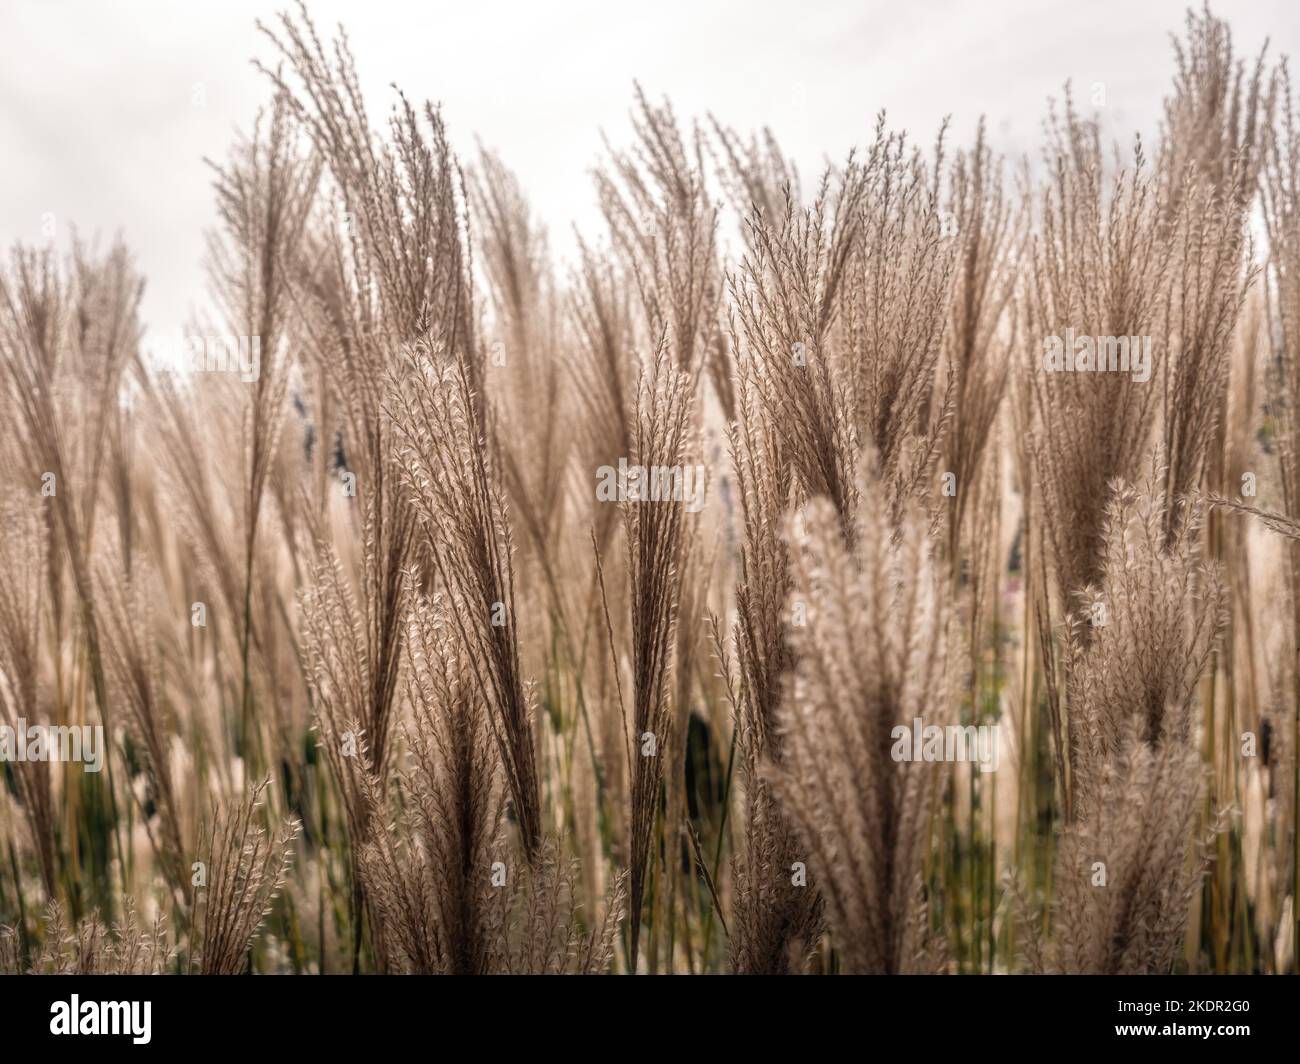 Closeup of giant dry Miscanthus grass spikes waveing in the wind Stock Photo